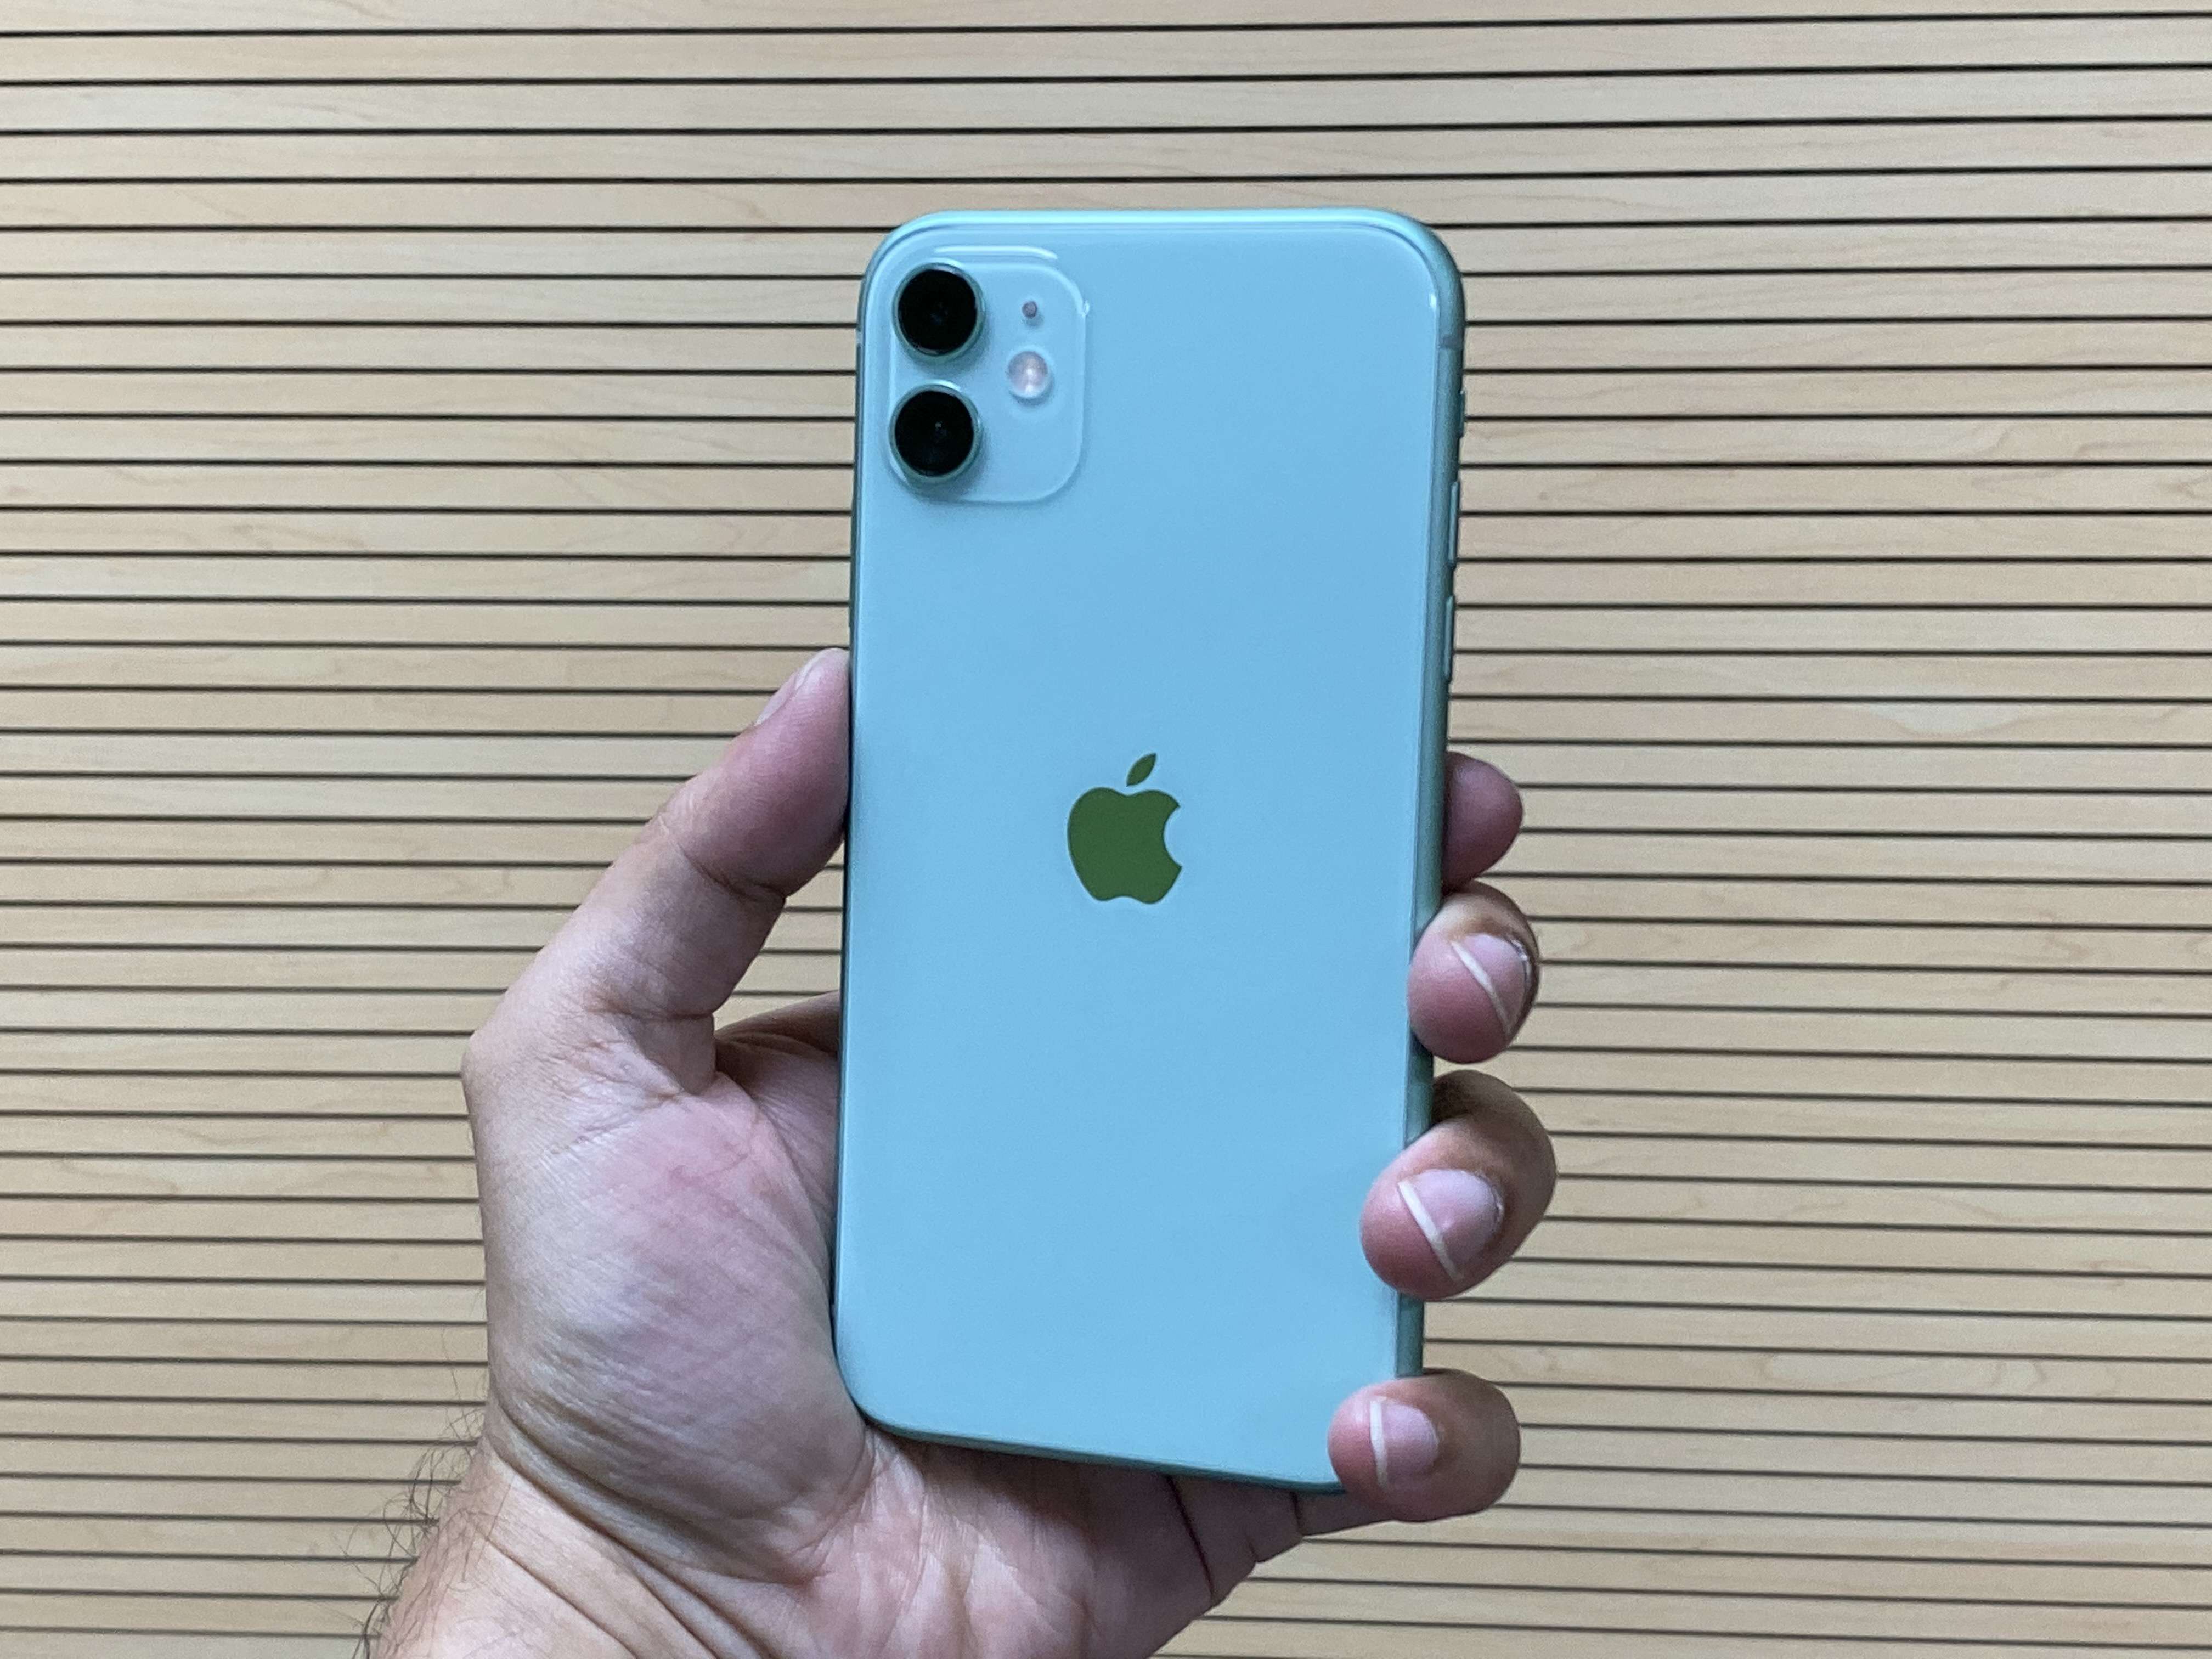 iPhone 11 Price, Specification & Features at Gadgets Now (4th Sep 2020)